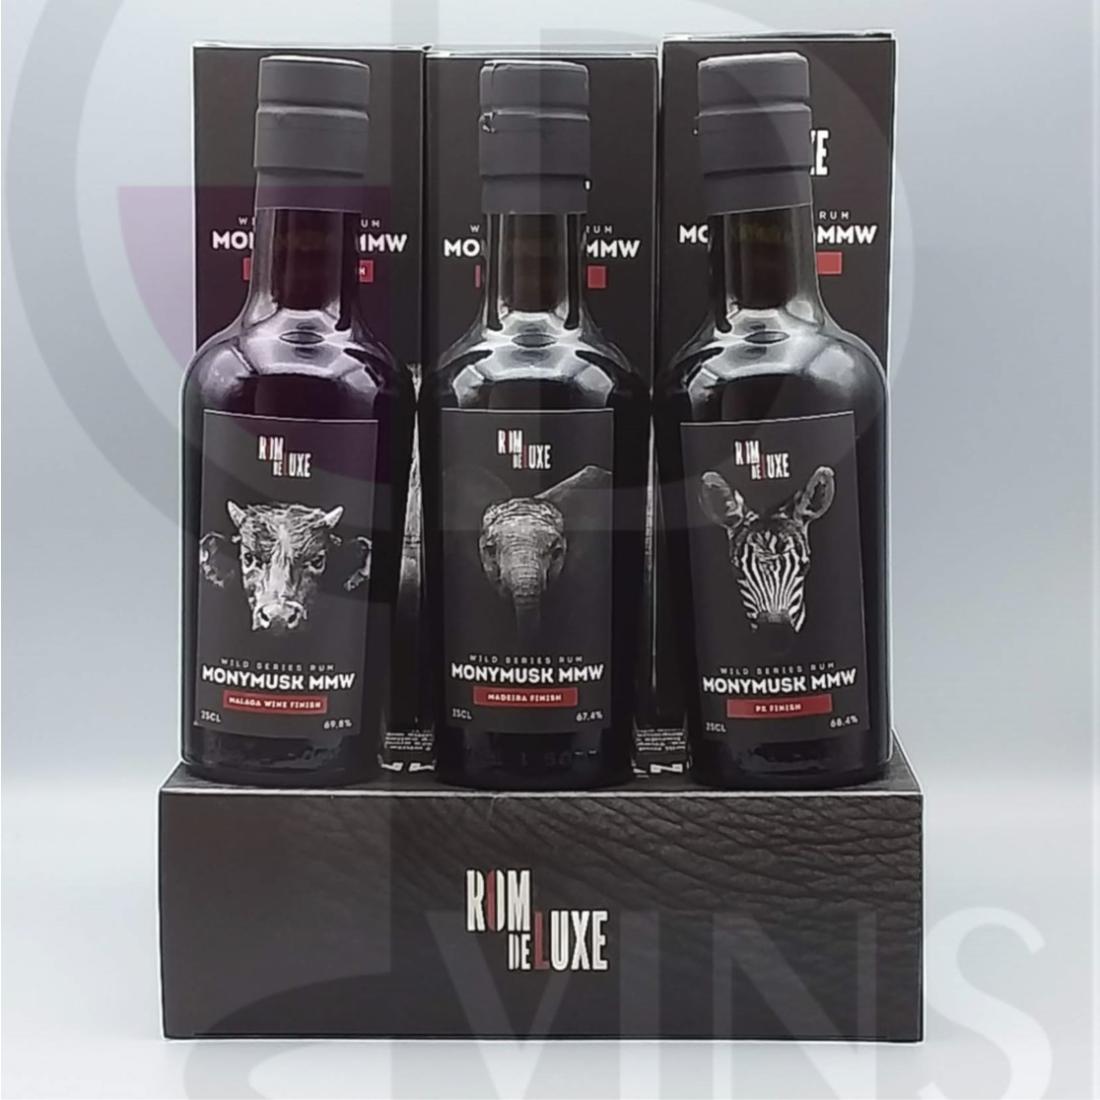 Rom de Luxe Wild Serie Rum Coffret Set Vol 2 Monymusk (Madera, Malage, PX) (3x20cl)